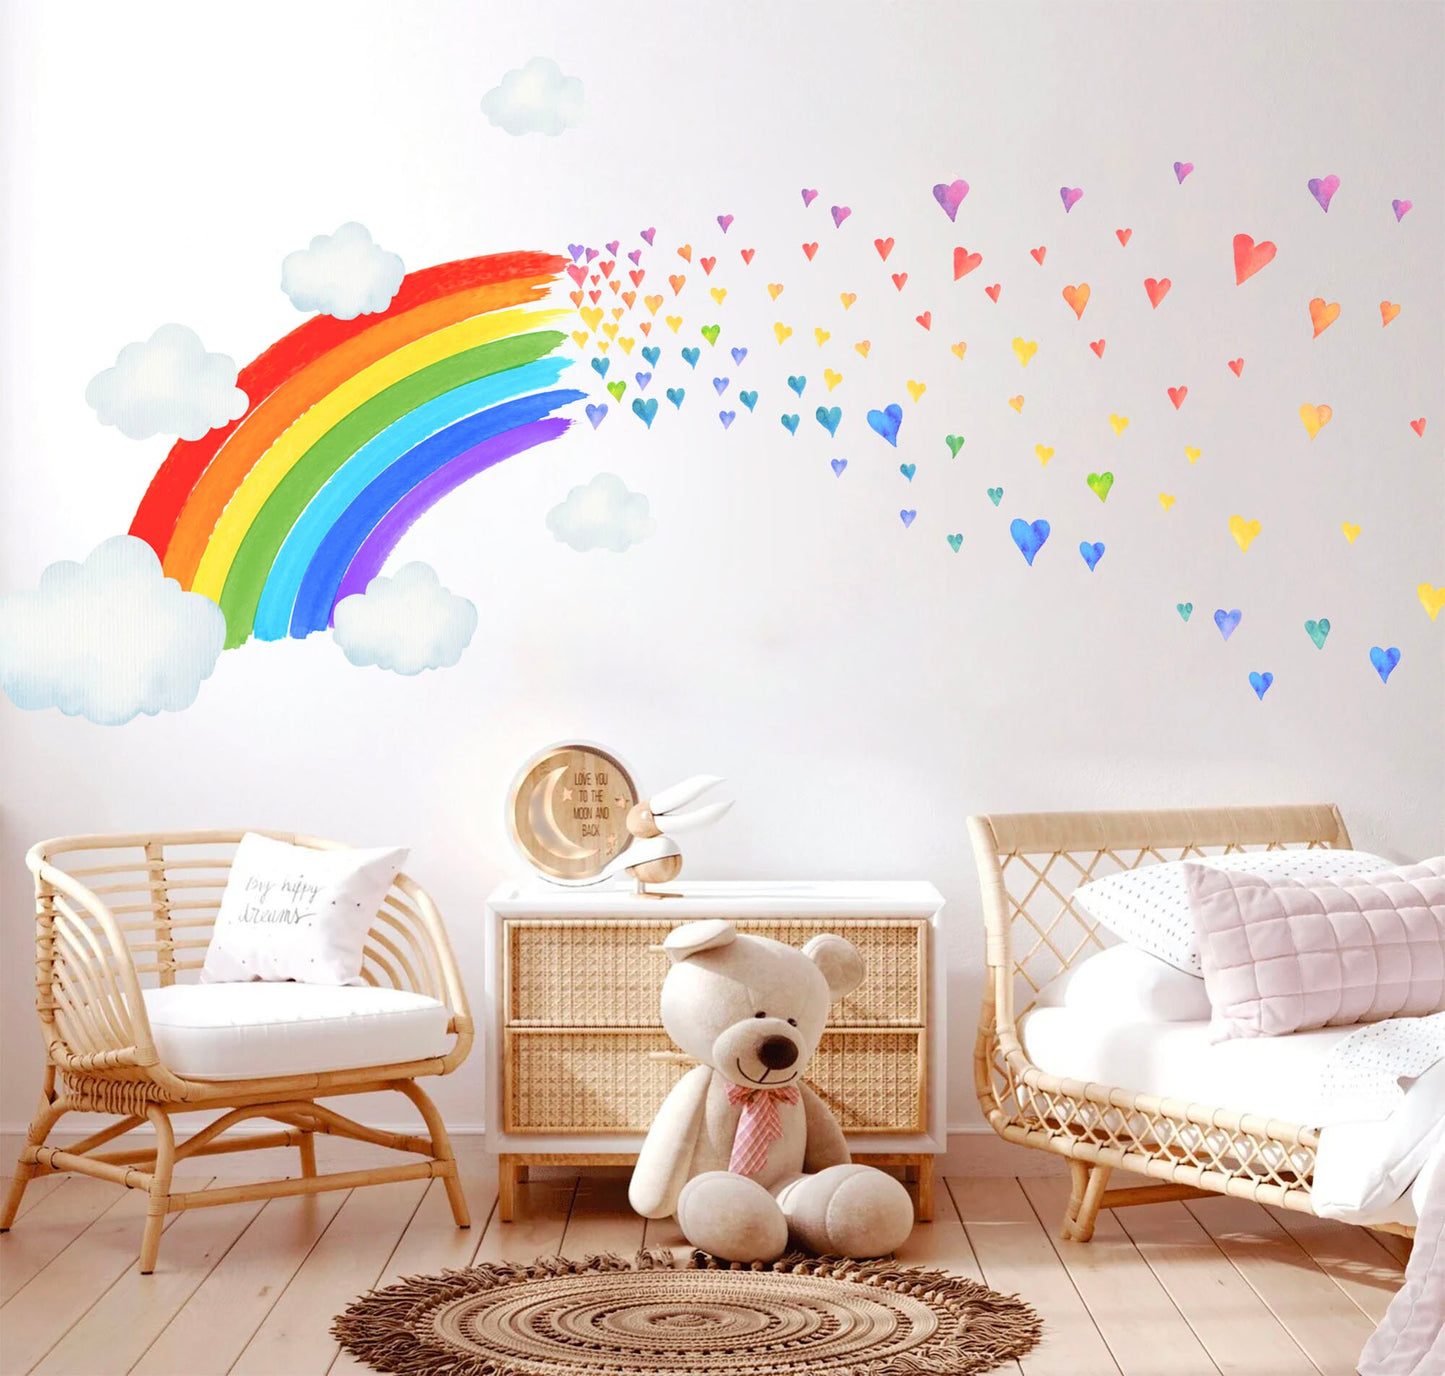 Rainbow Hearts Cloud Wall Sticker - Colorful Watercolor Decal for Kids Room Decor - BR222